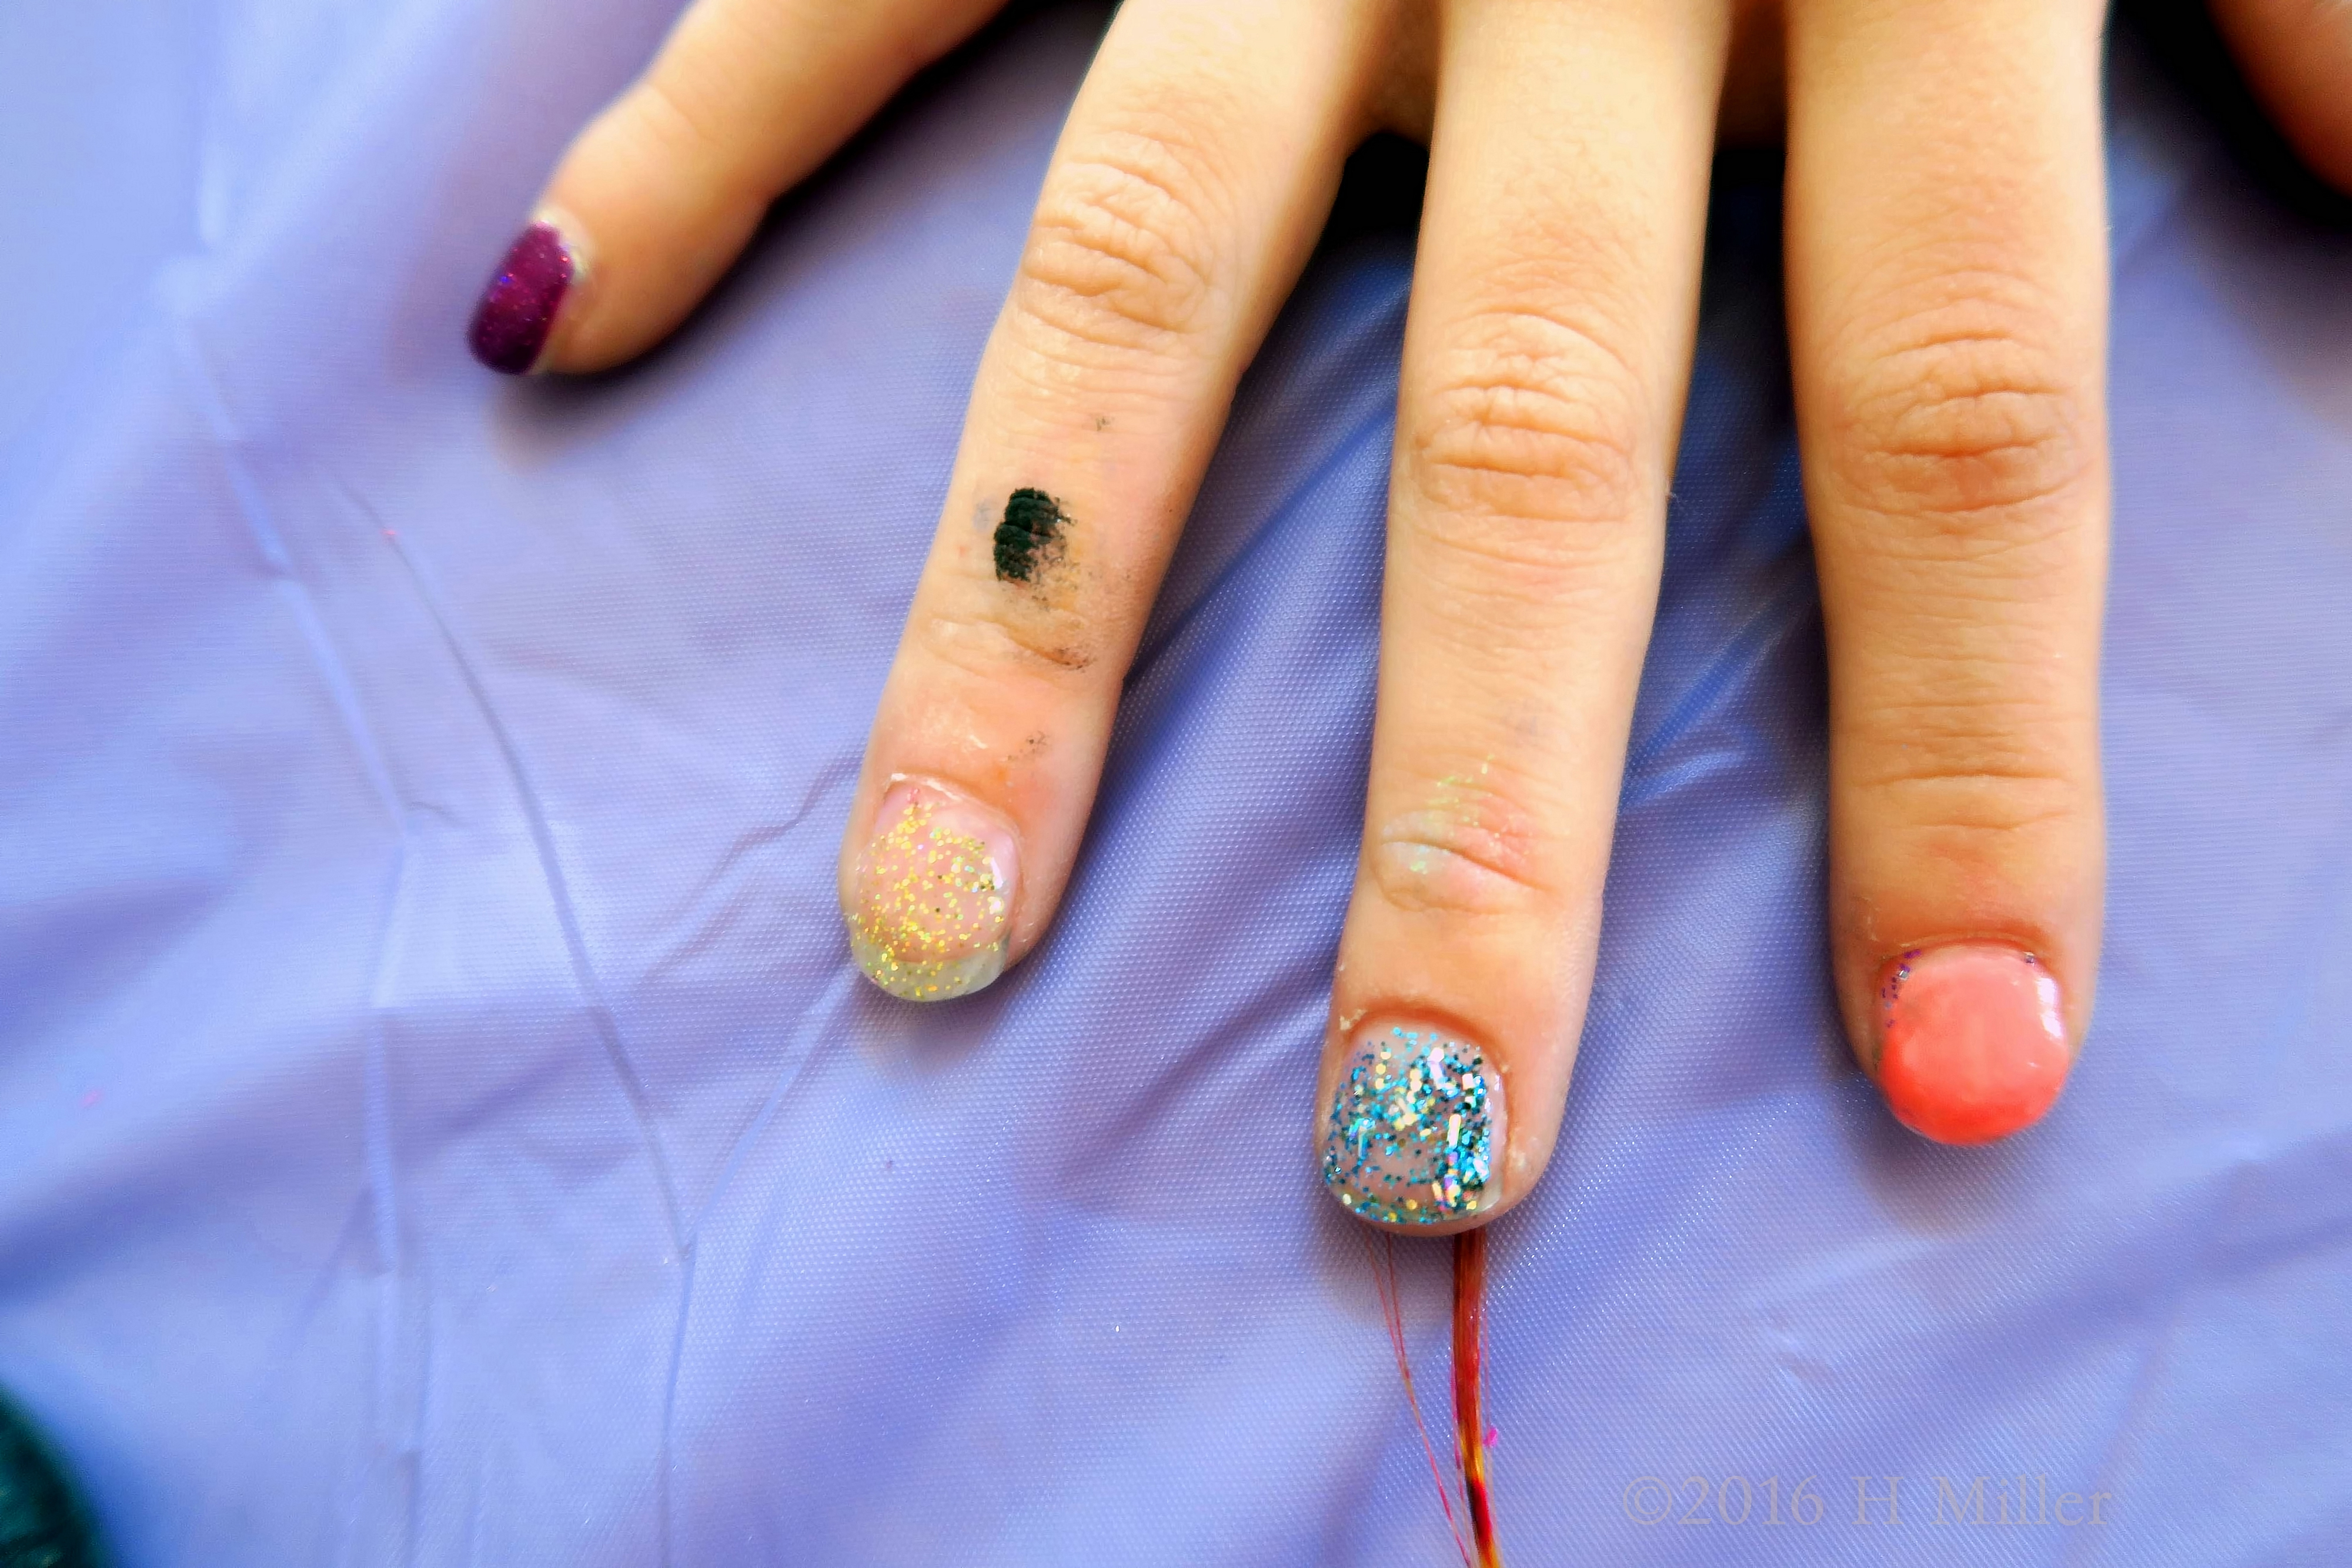 Alternating Kids Nail Designs A Different One For Each Nail! 